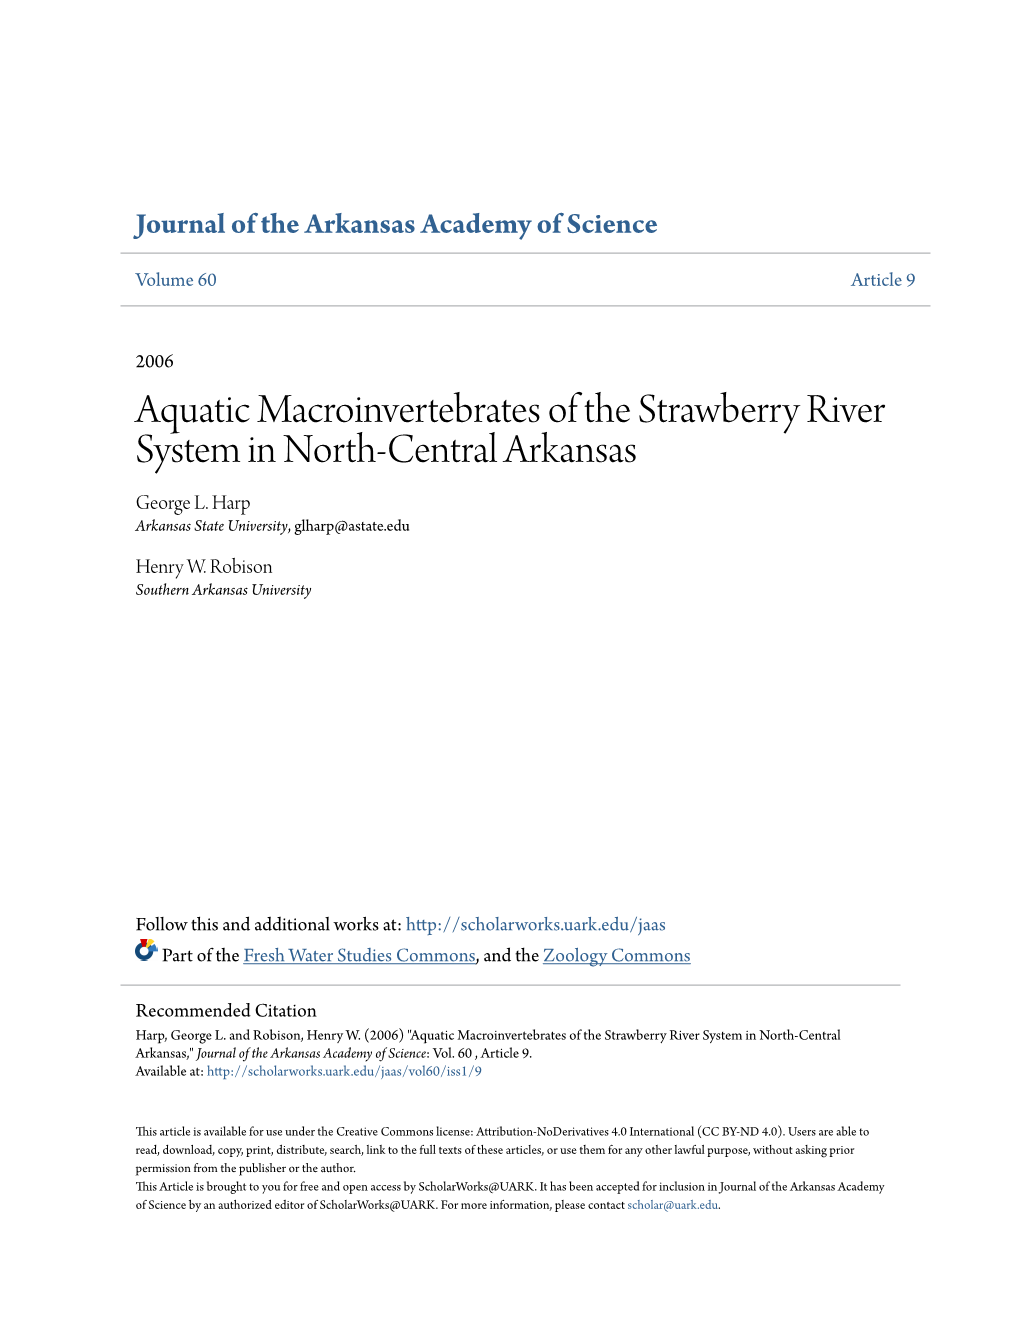 Aquatic Macroinvertebrates of the Strawberry River System in North-Central Arkansas George L